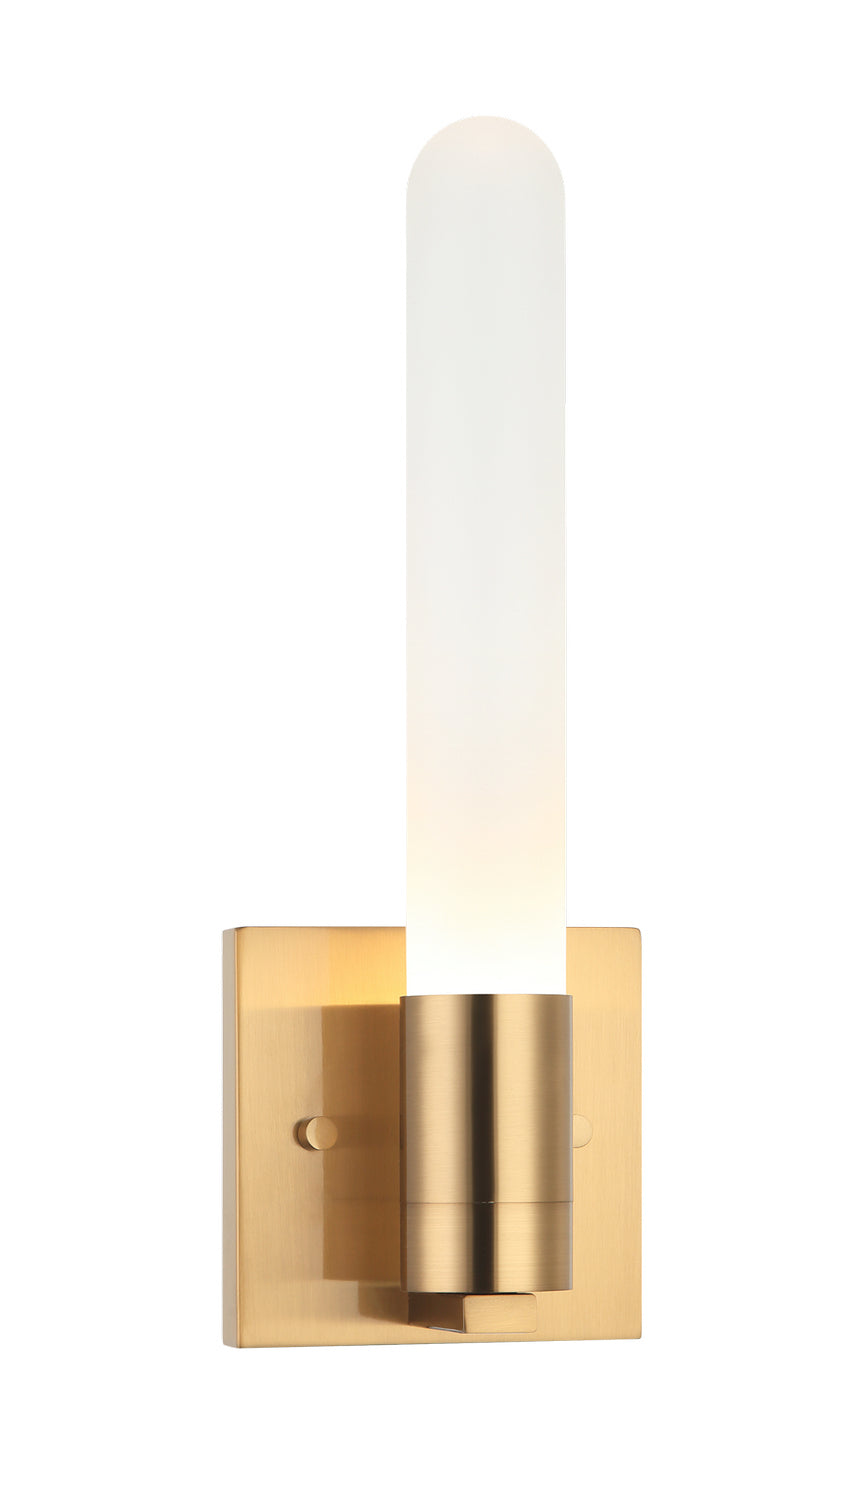 AYDIN Sconce Gold - W65801AG |TEO